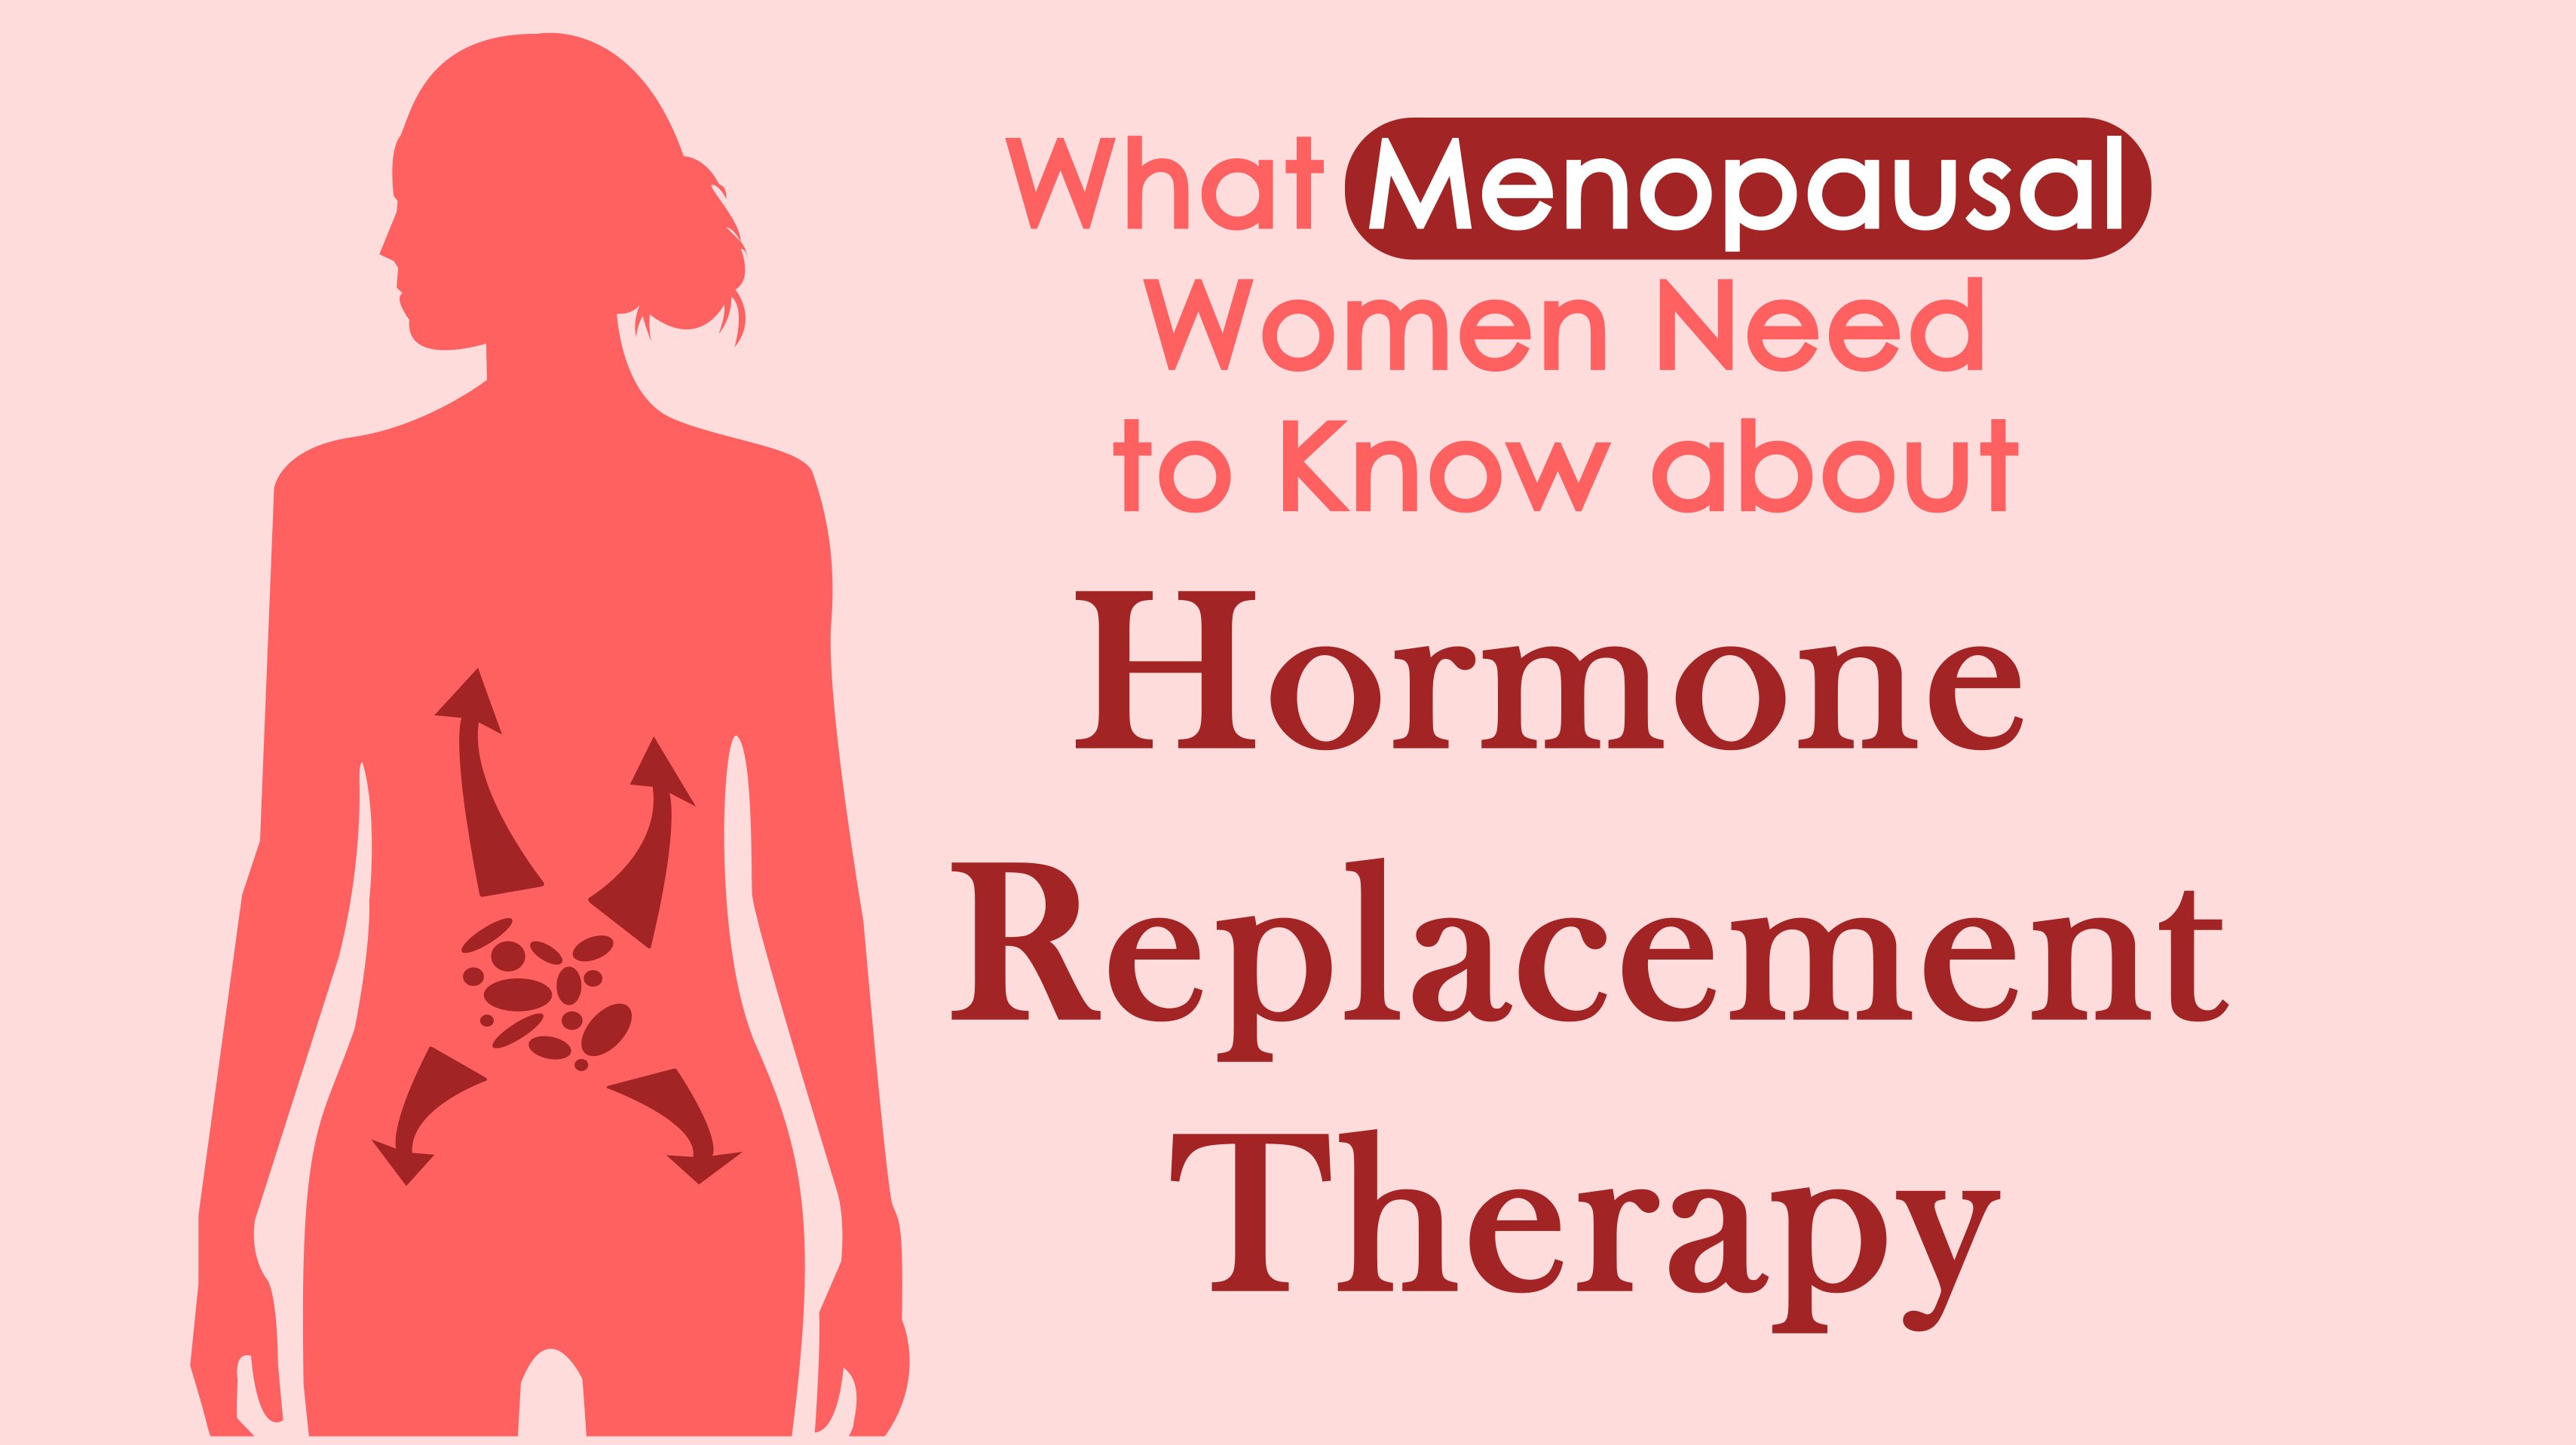 What Menopausal Women Need to Know About Hormone Replacement Therapy - Wome...